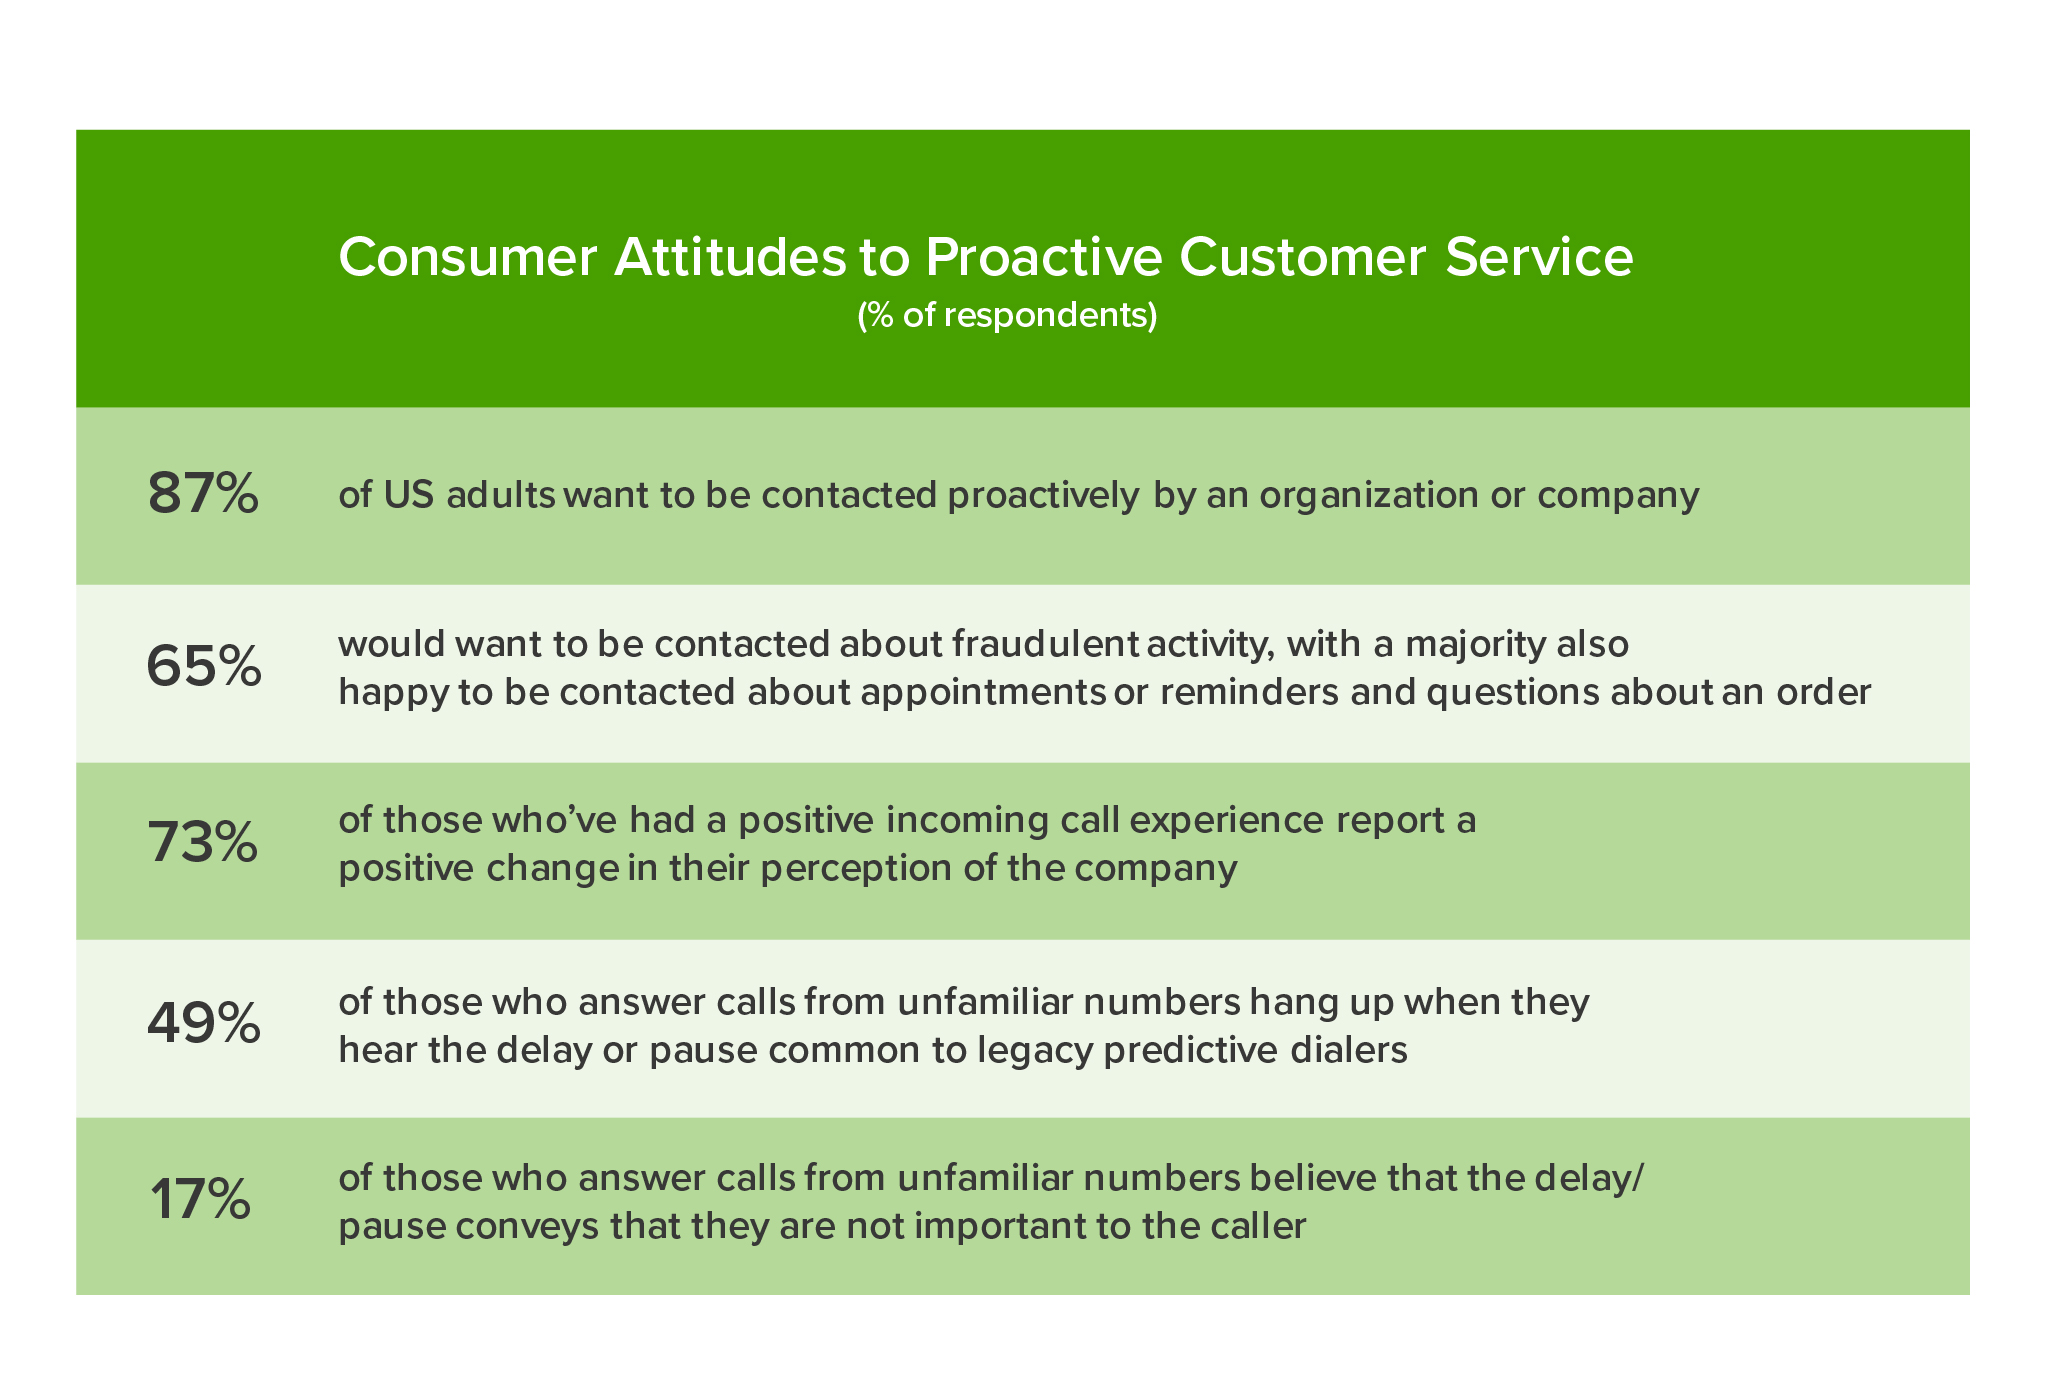 Customer attitudes to proactive support